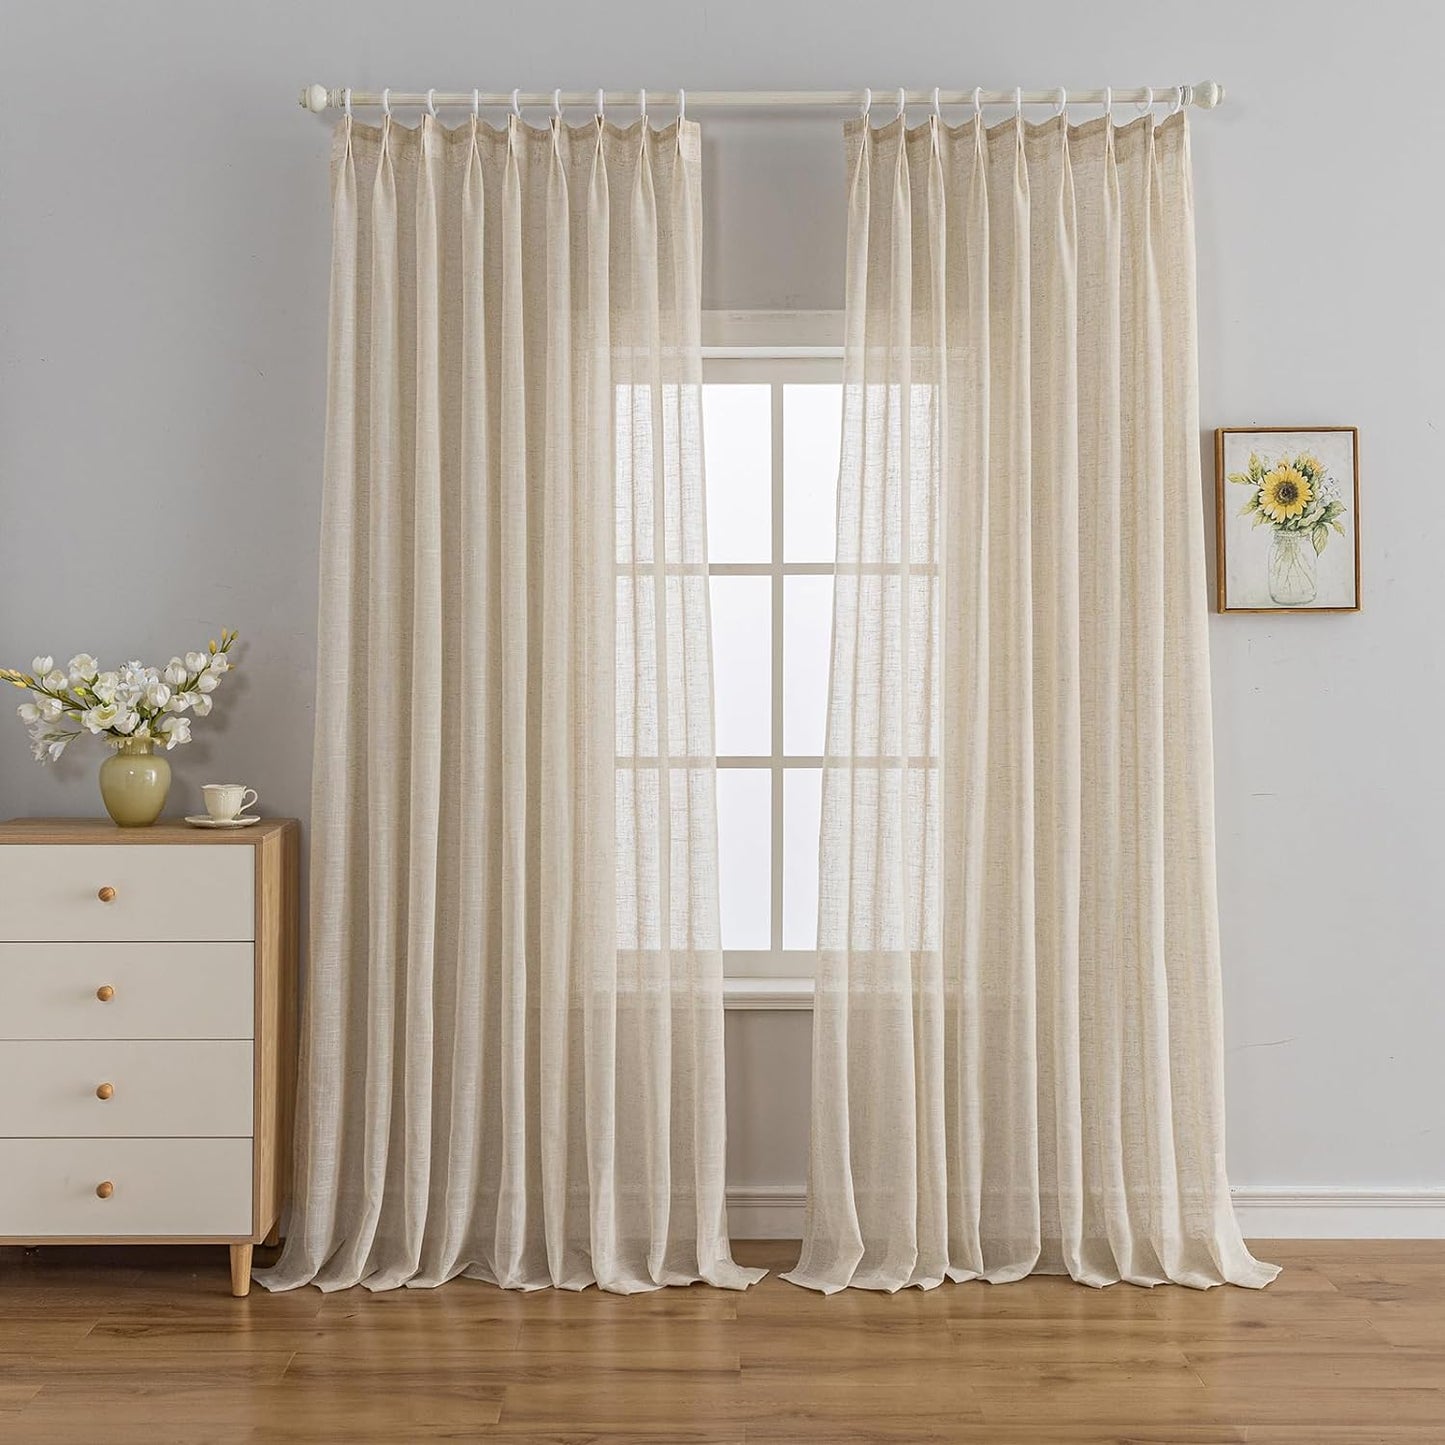 LUGOTAL Pinch Pleated Drapes 108 Inches Long 1 Panel off White Chiffon Sheer Curtains for Living Room and Bedroom Semi-Sheer Light Filtering Curtains & Drapes for Sliding Glass Door, W52 X L108  LUGOTAL Natural (W52" X L108")*1 Panel 